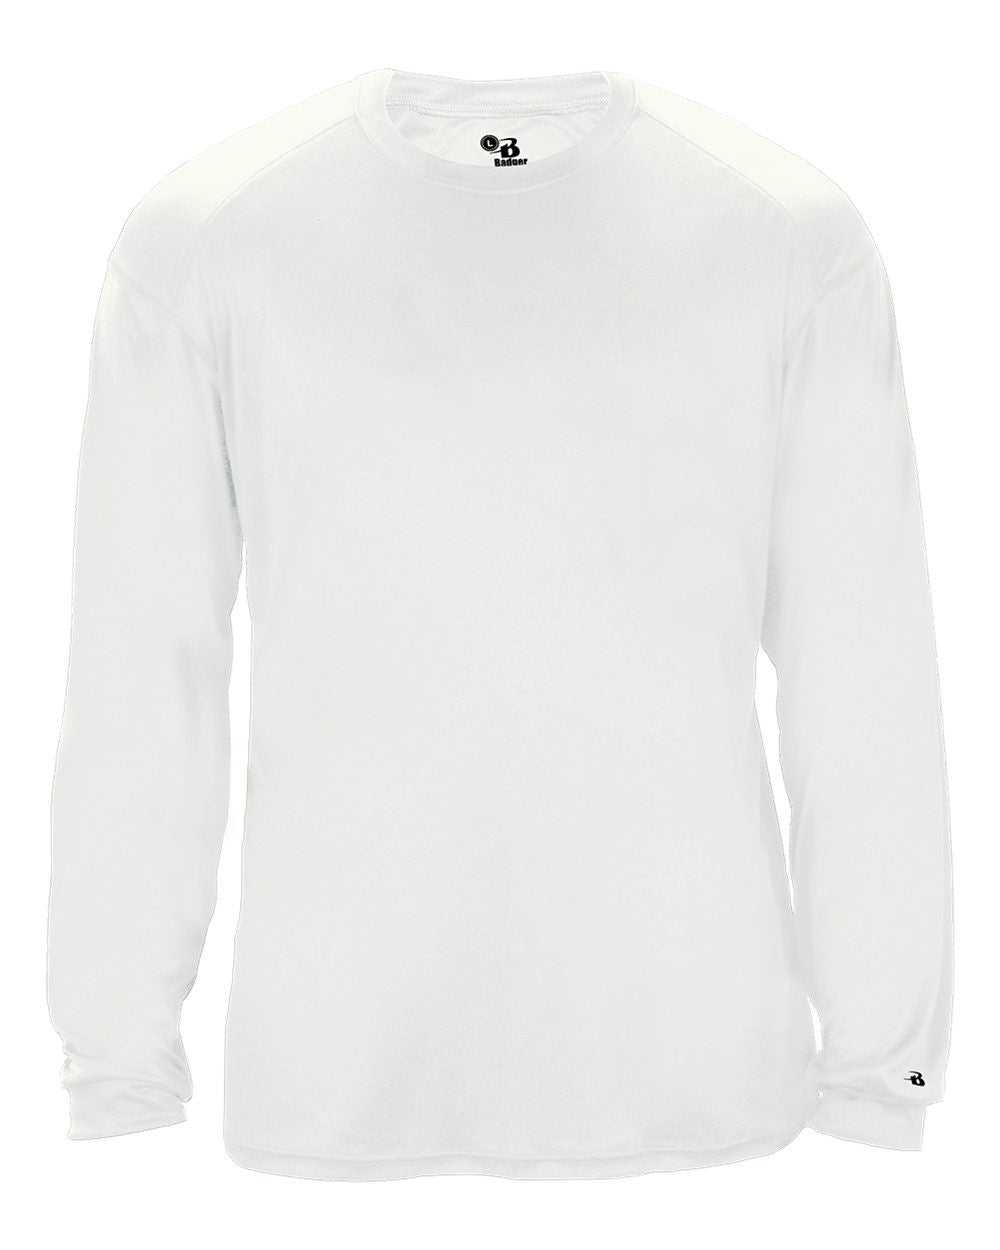 Badger Sport 2004 Ultimate Softlock Youth Long Sleeve Tee - White - HIT a Double - 1